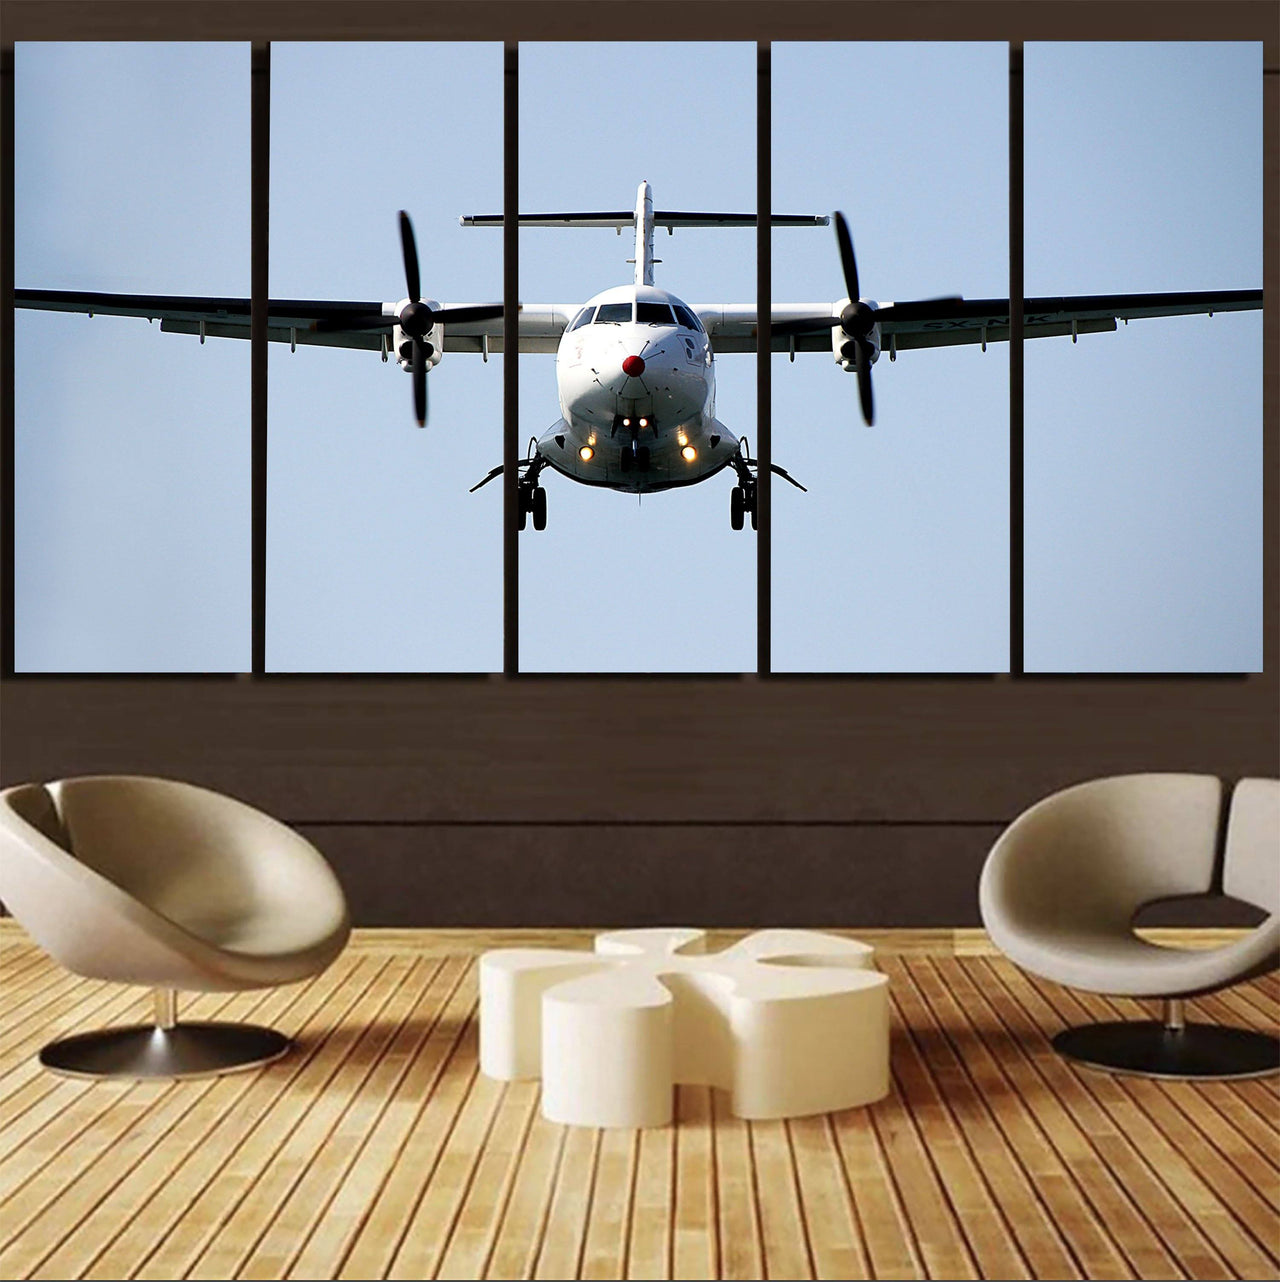 Face to Face with an ATR Printed Canvas Prints (5 Pieces) Aviation Shop 